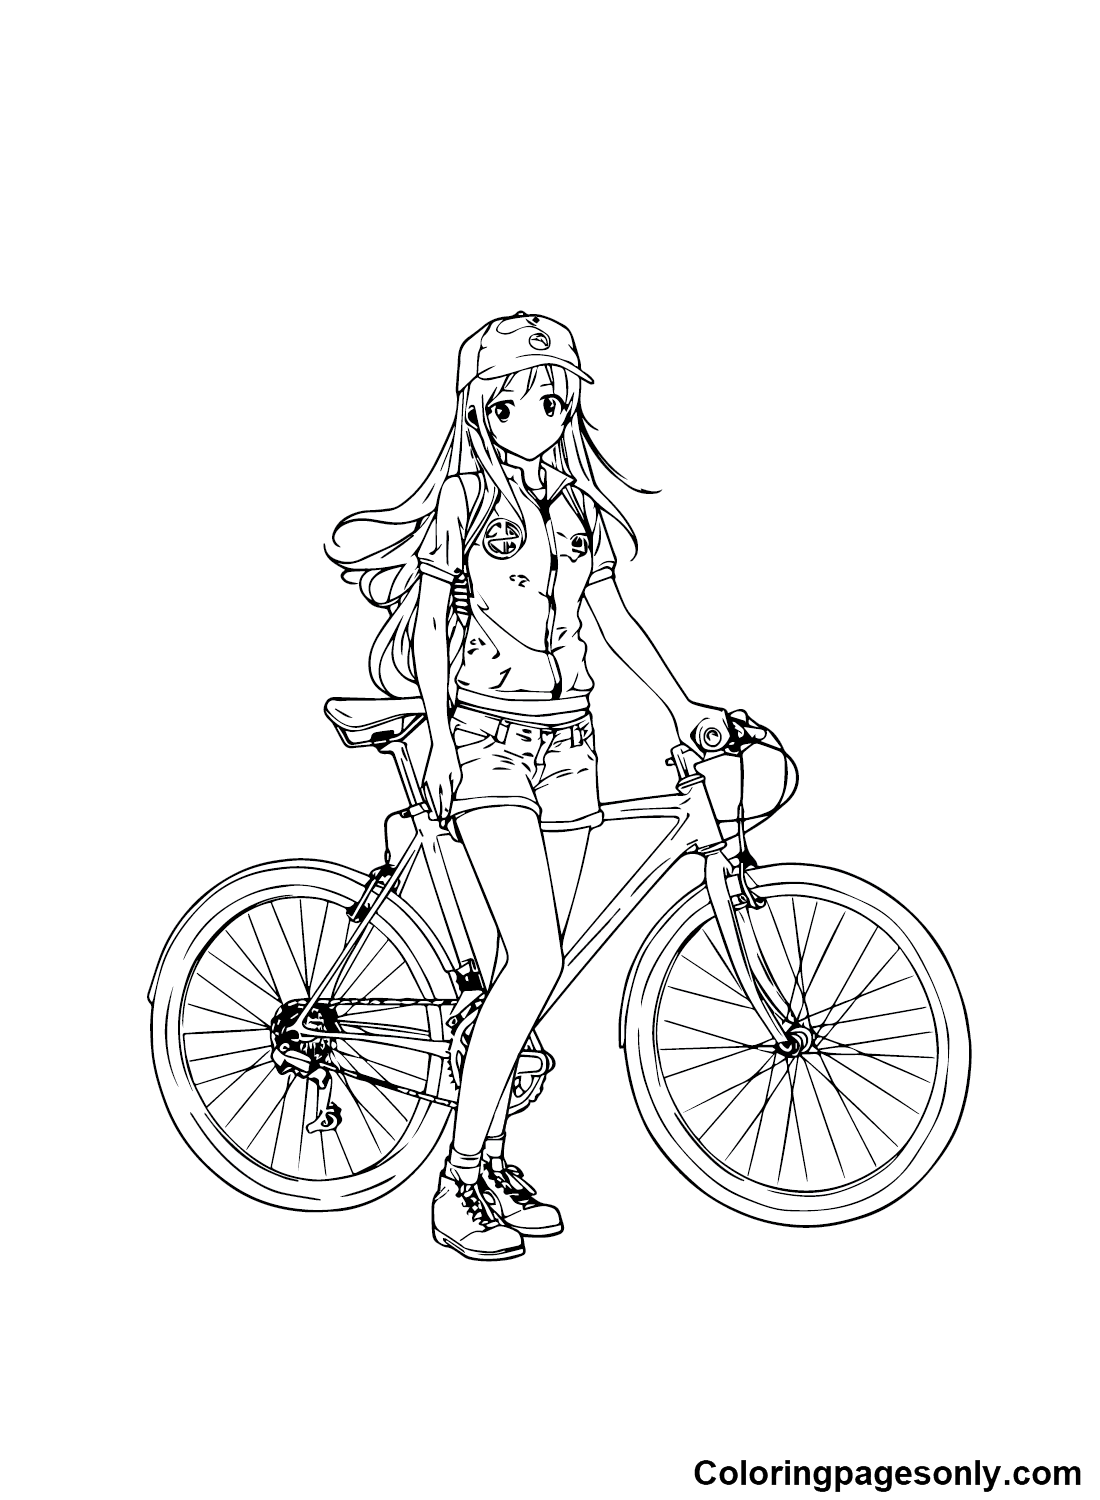 Hot Anime Girl Coloring Page